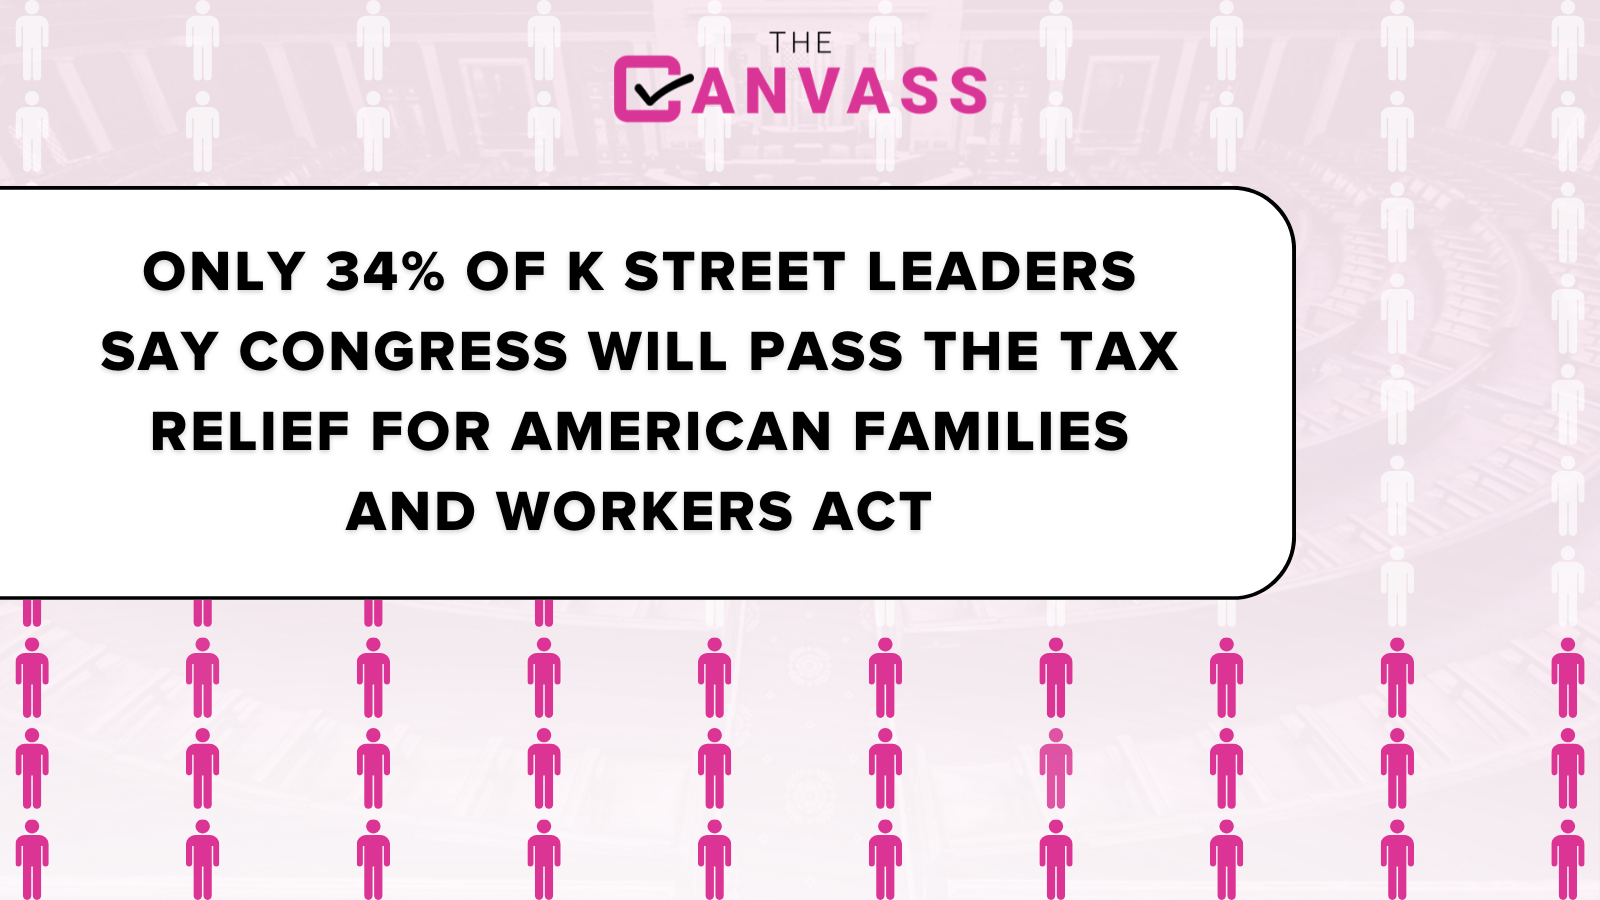 34% of K Street leaders say Congress will pass the Tax Relief for American Families and Workers Act